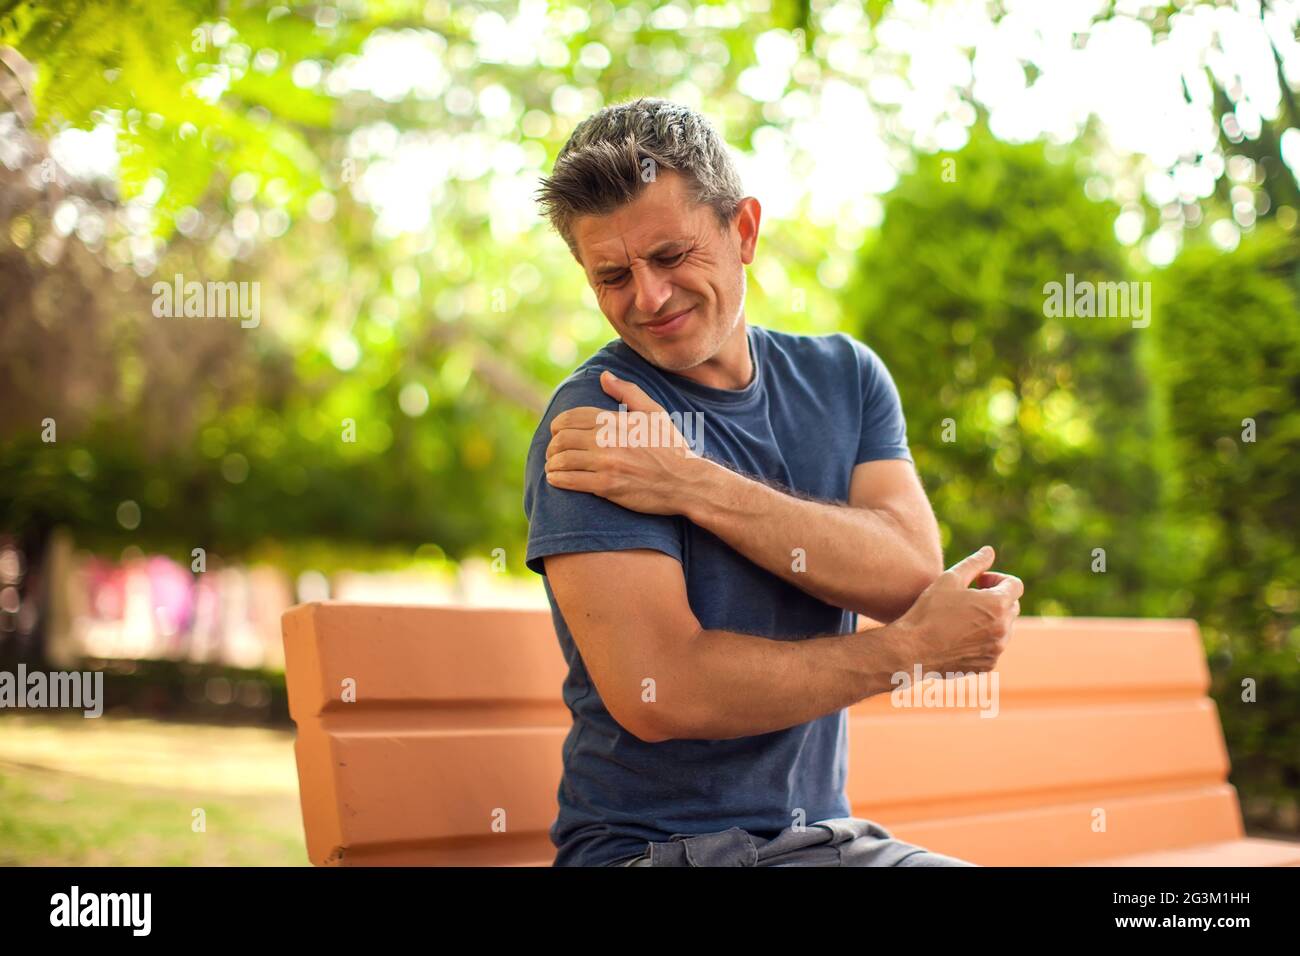 Man with shoulder pain sitting on the bench in the park. Healthcare and medicine concept Stock Photo